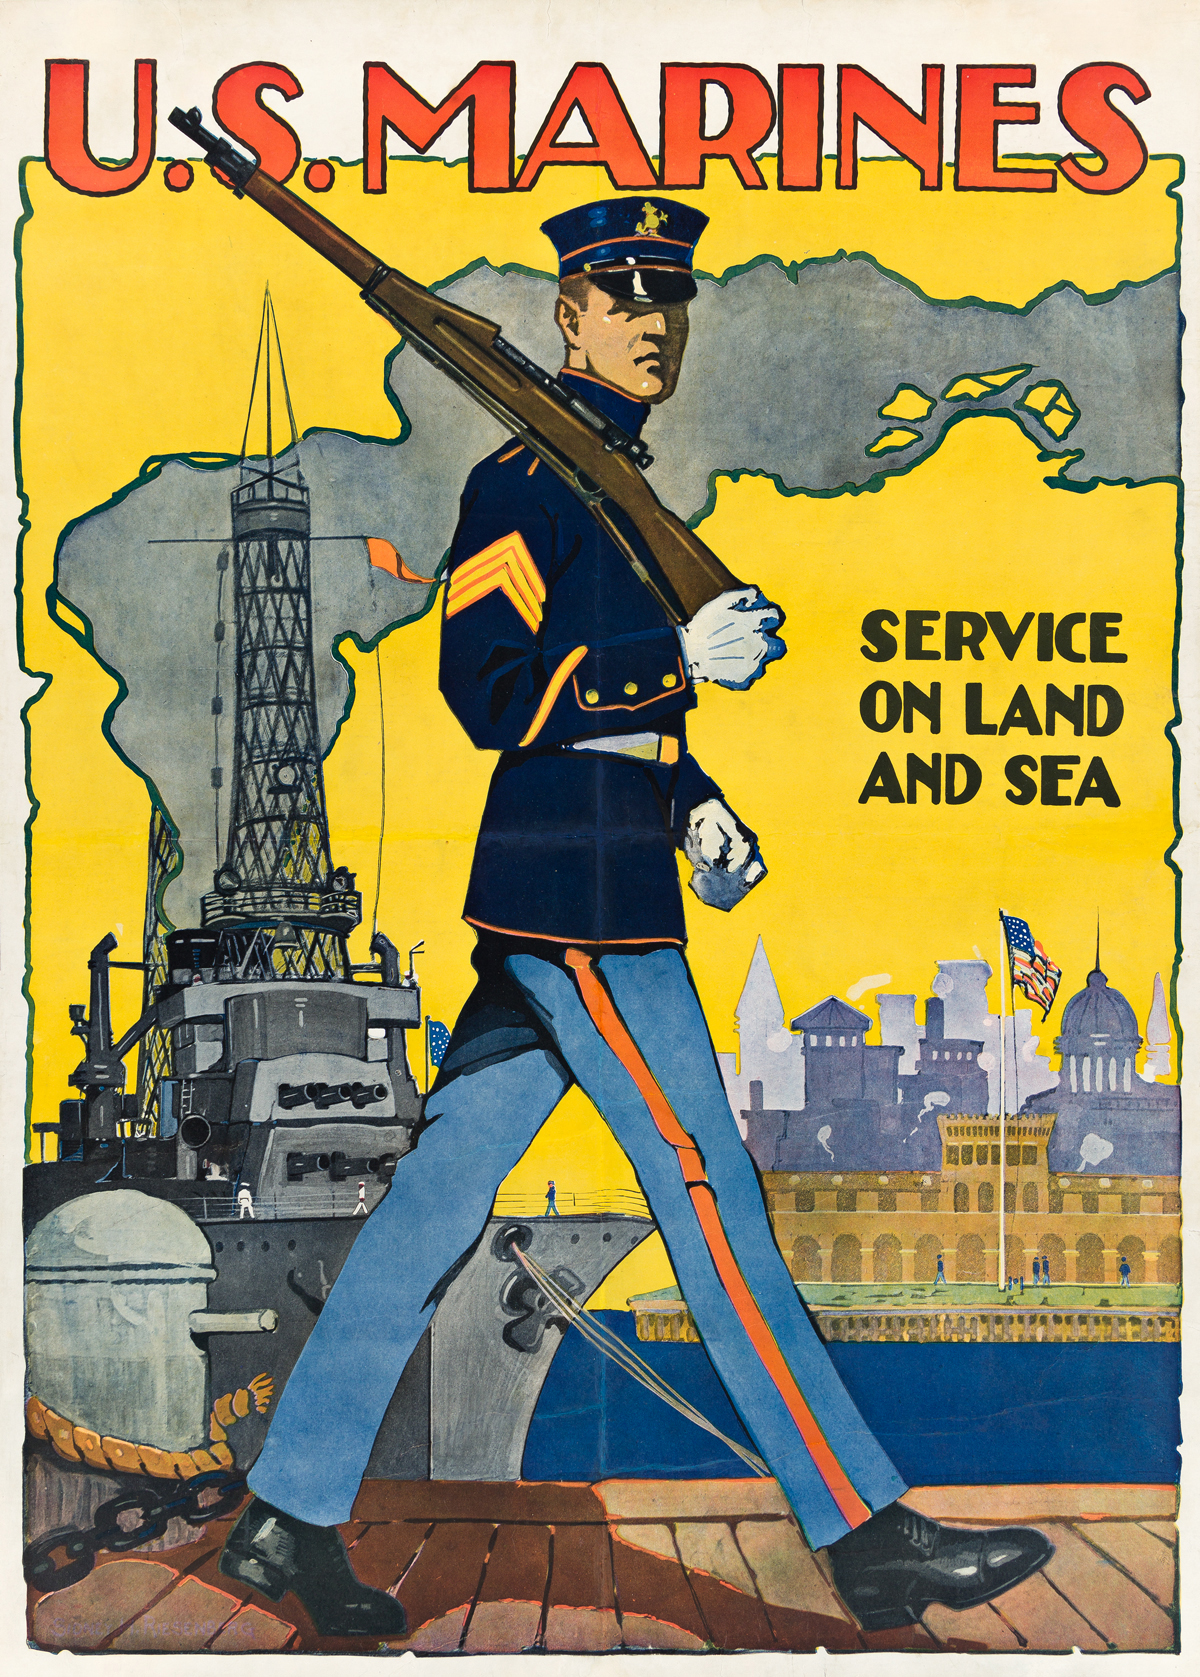 SIDNEY H. RIESENBERG (1885-1972).  U.S. MARINES / SERVICE ON LAND AND SEA. 1917. 35¾x25½ inches, 90¾x64¾ cm.